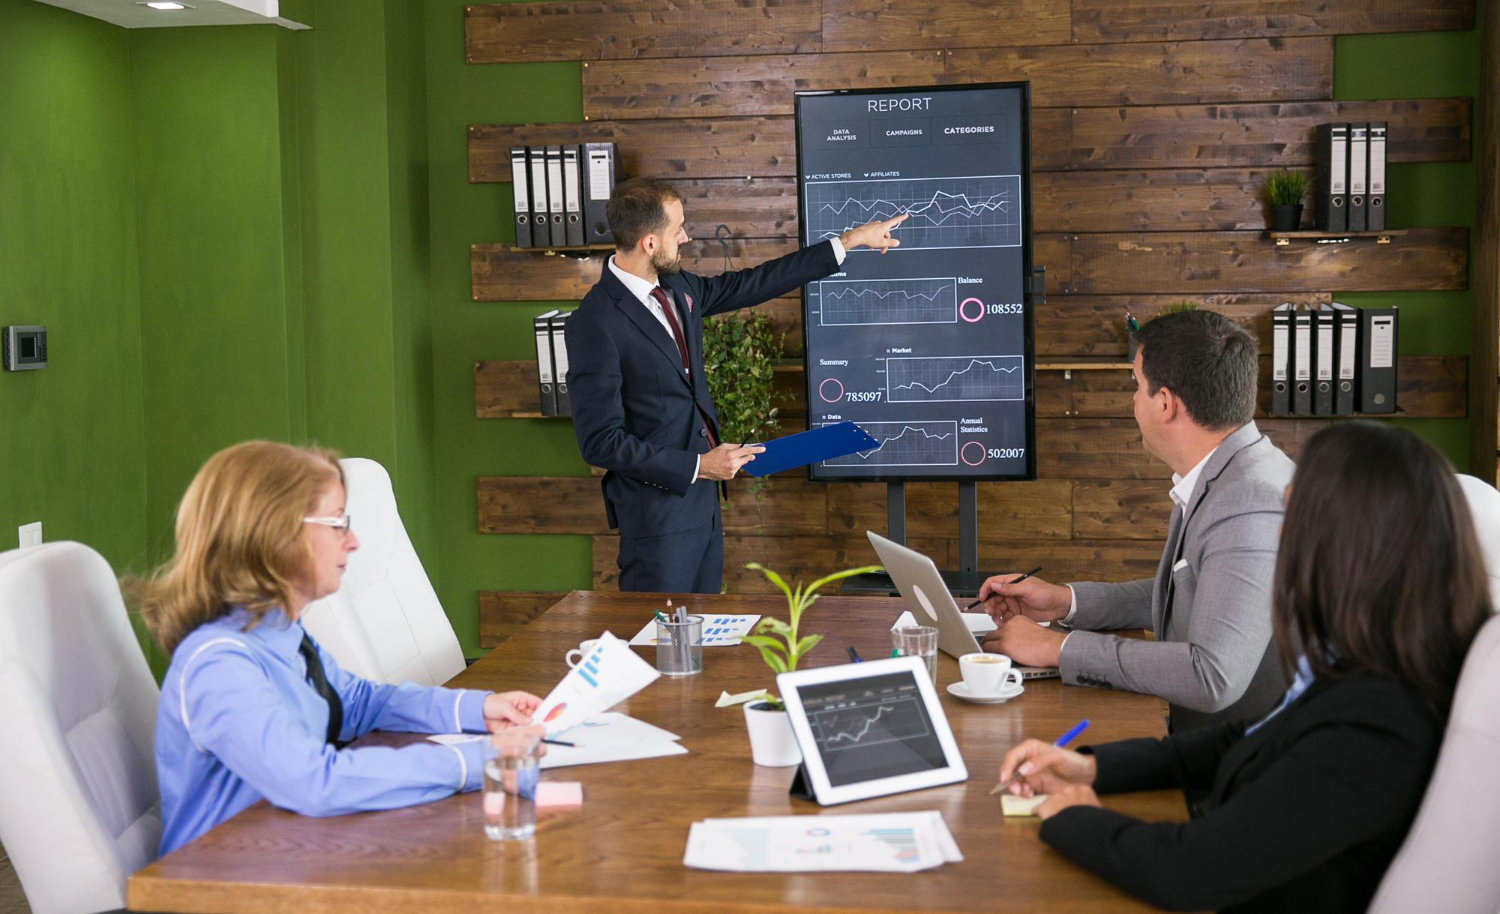 Boosting Engagement and Productivity with Interactive Business Displays